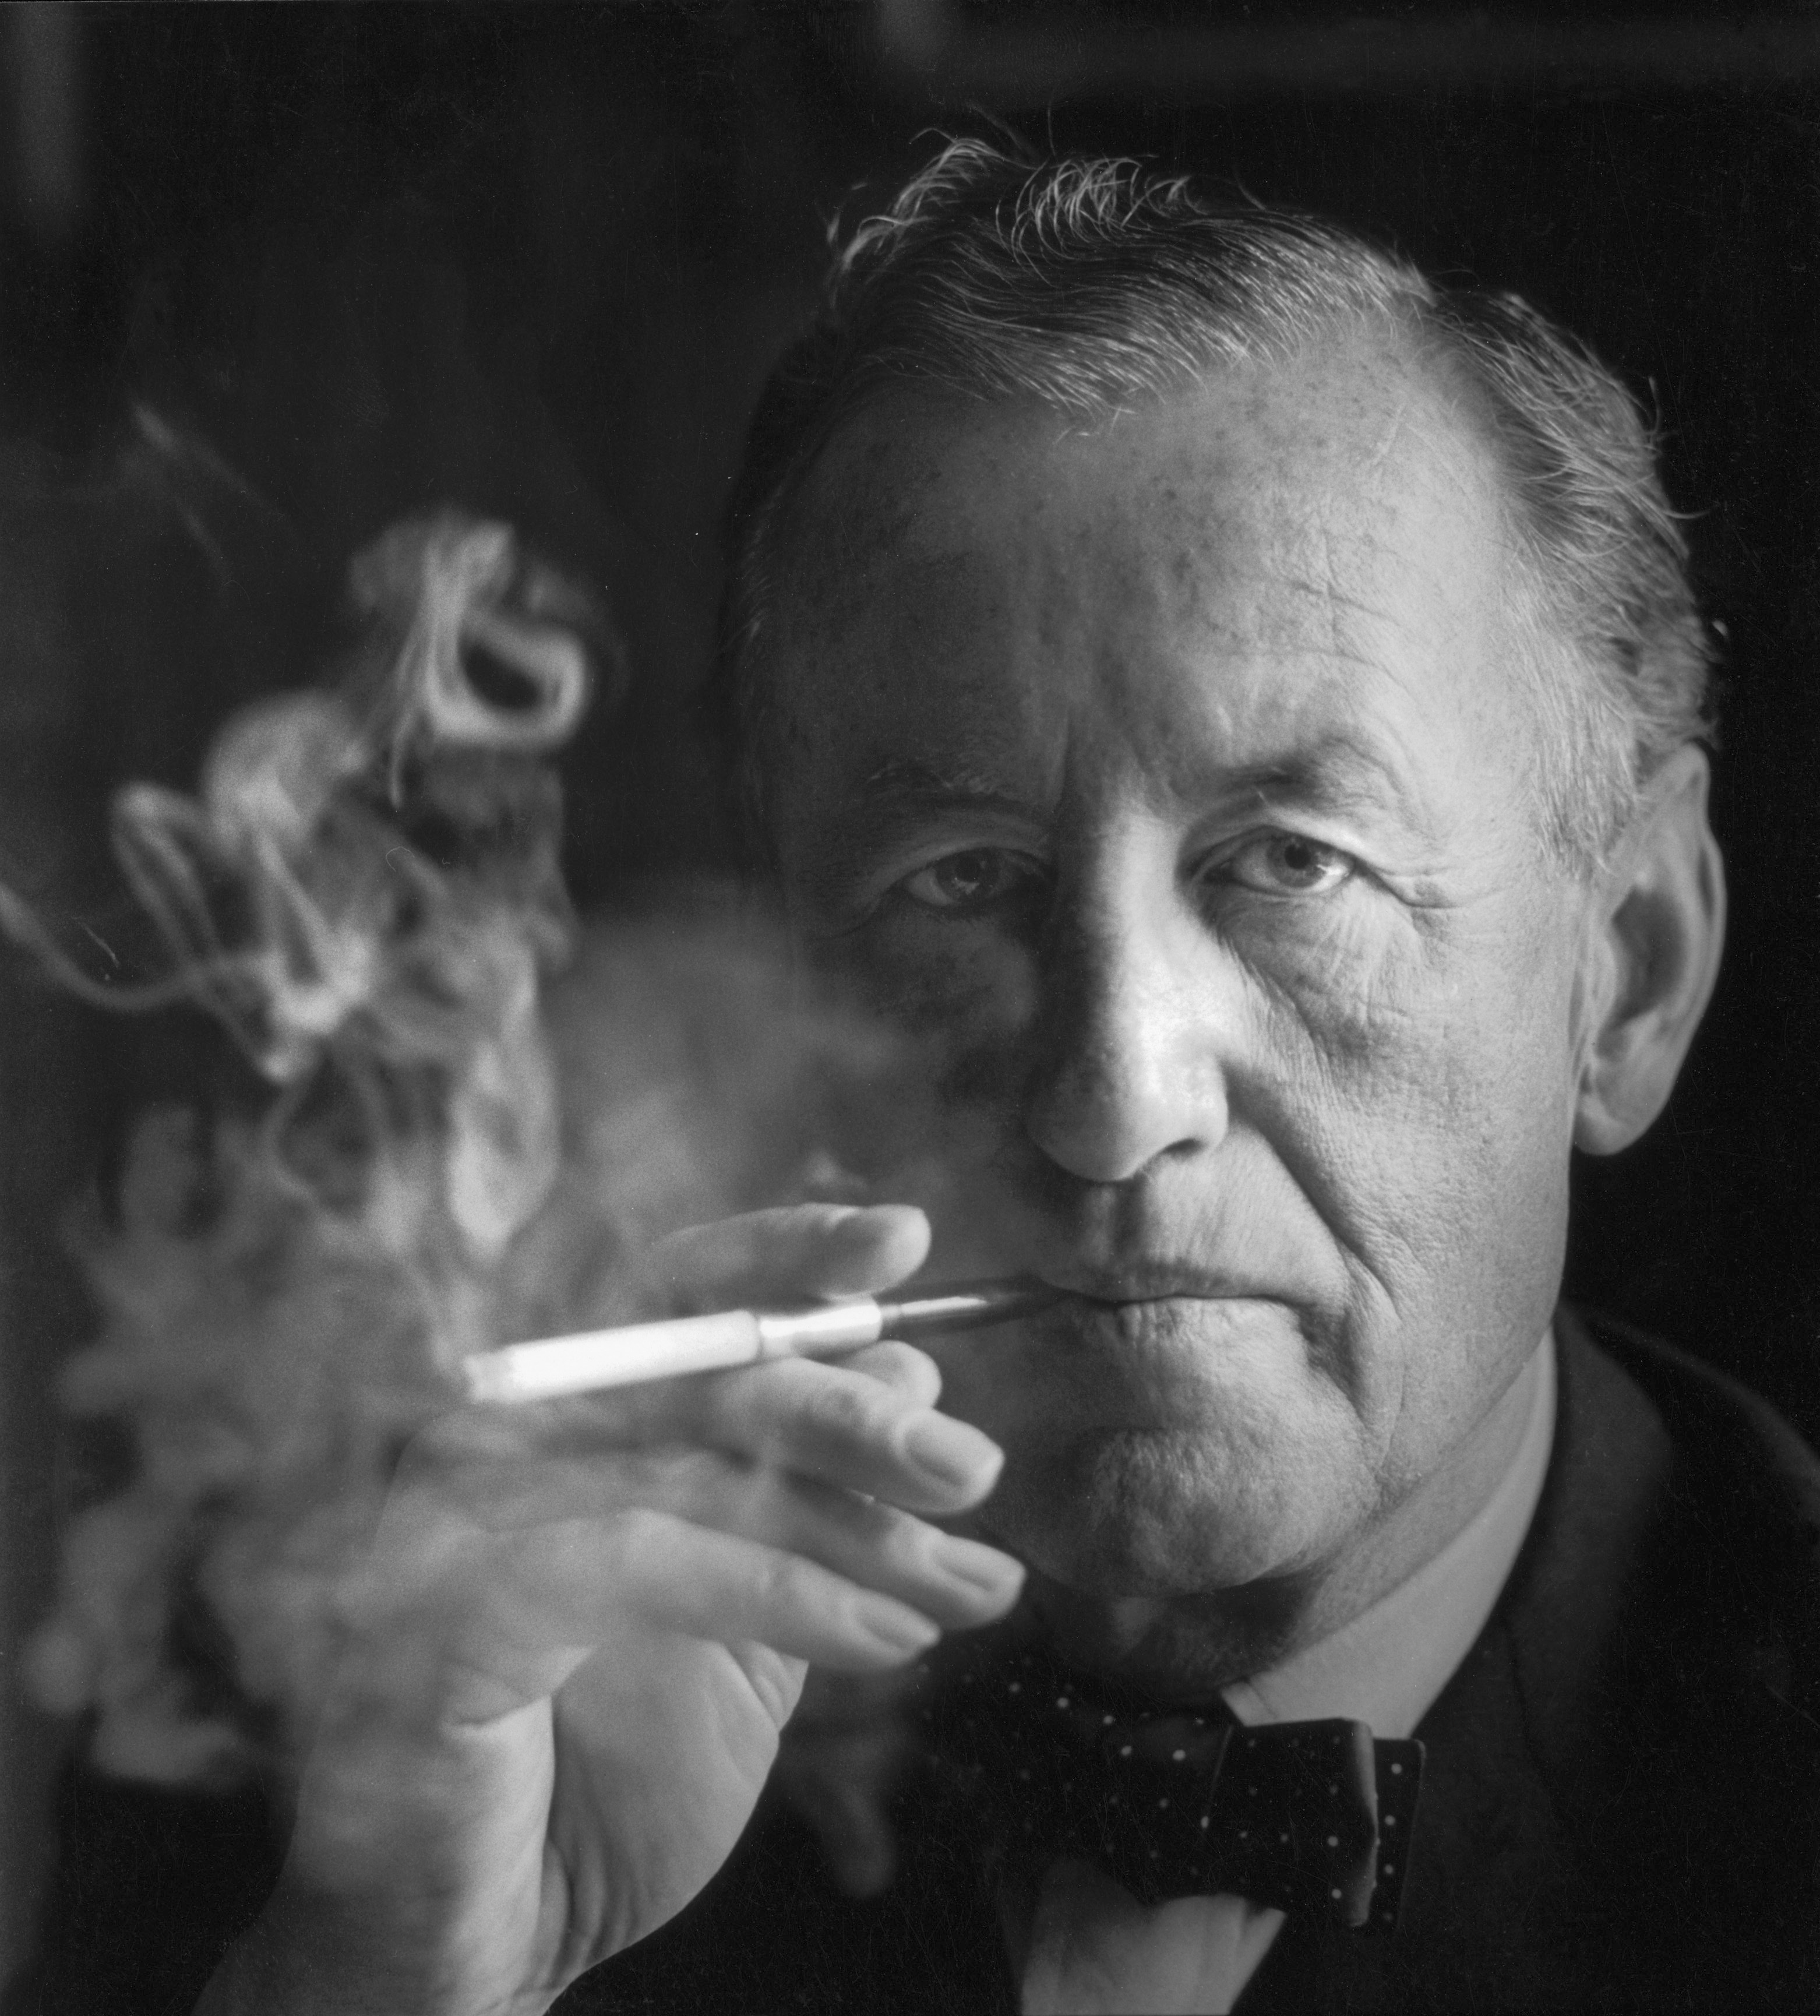 Ian Fleming (1908-1964), the creator of James Bond, creating a bit of a "smoke screen" symbolic of parts of his own secret service life, and that of 007, his fictional character,  (Photo by Horst Tappe/Hulton circa 1960. Archive/Getty Images)